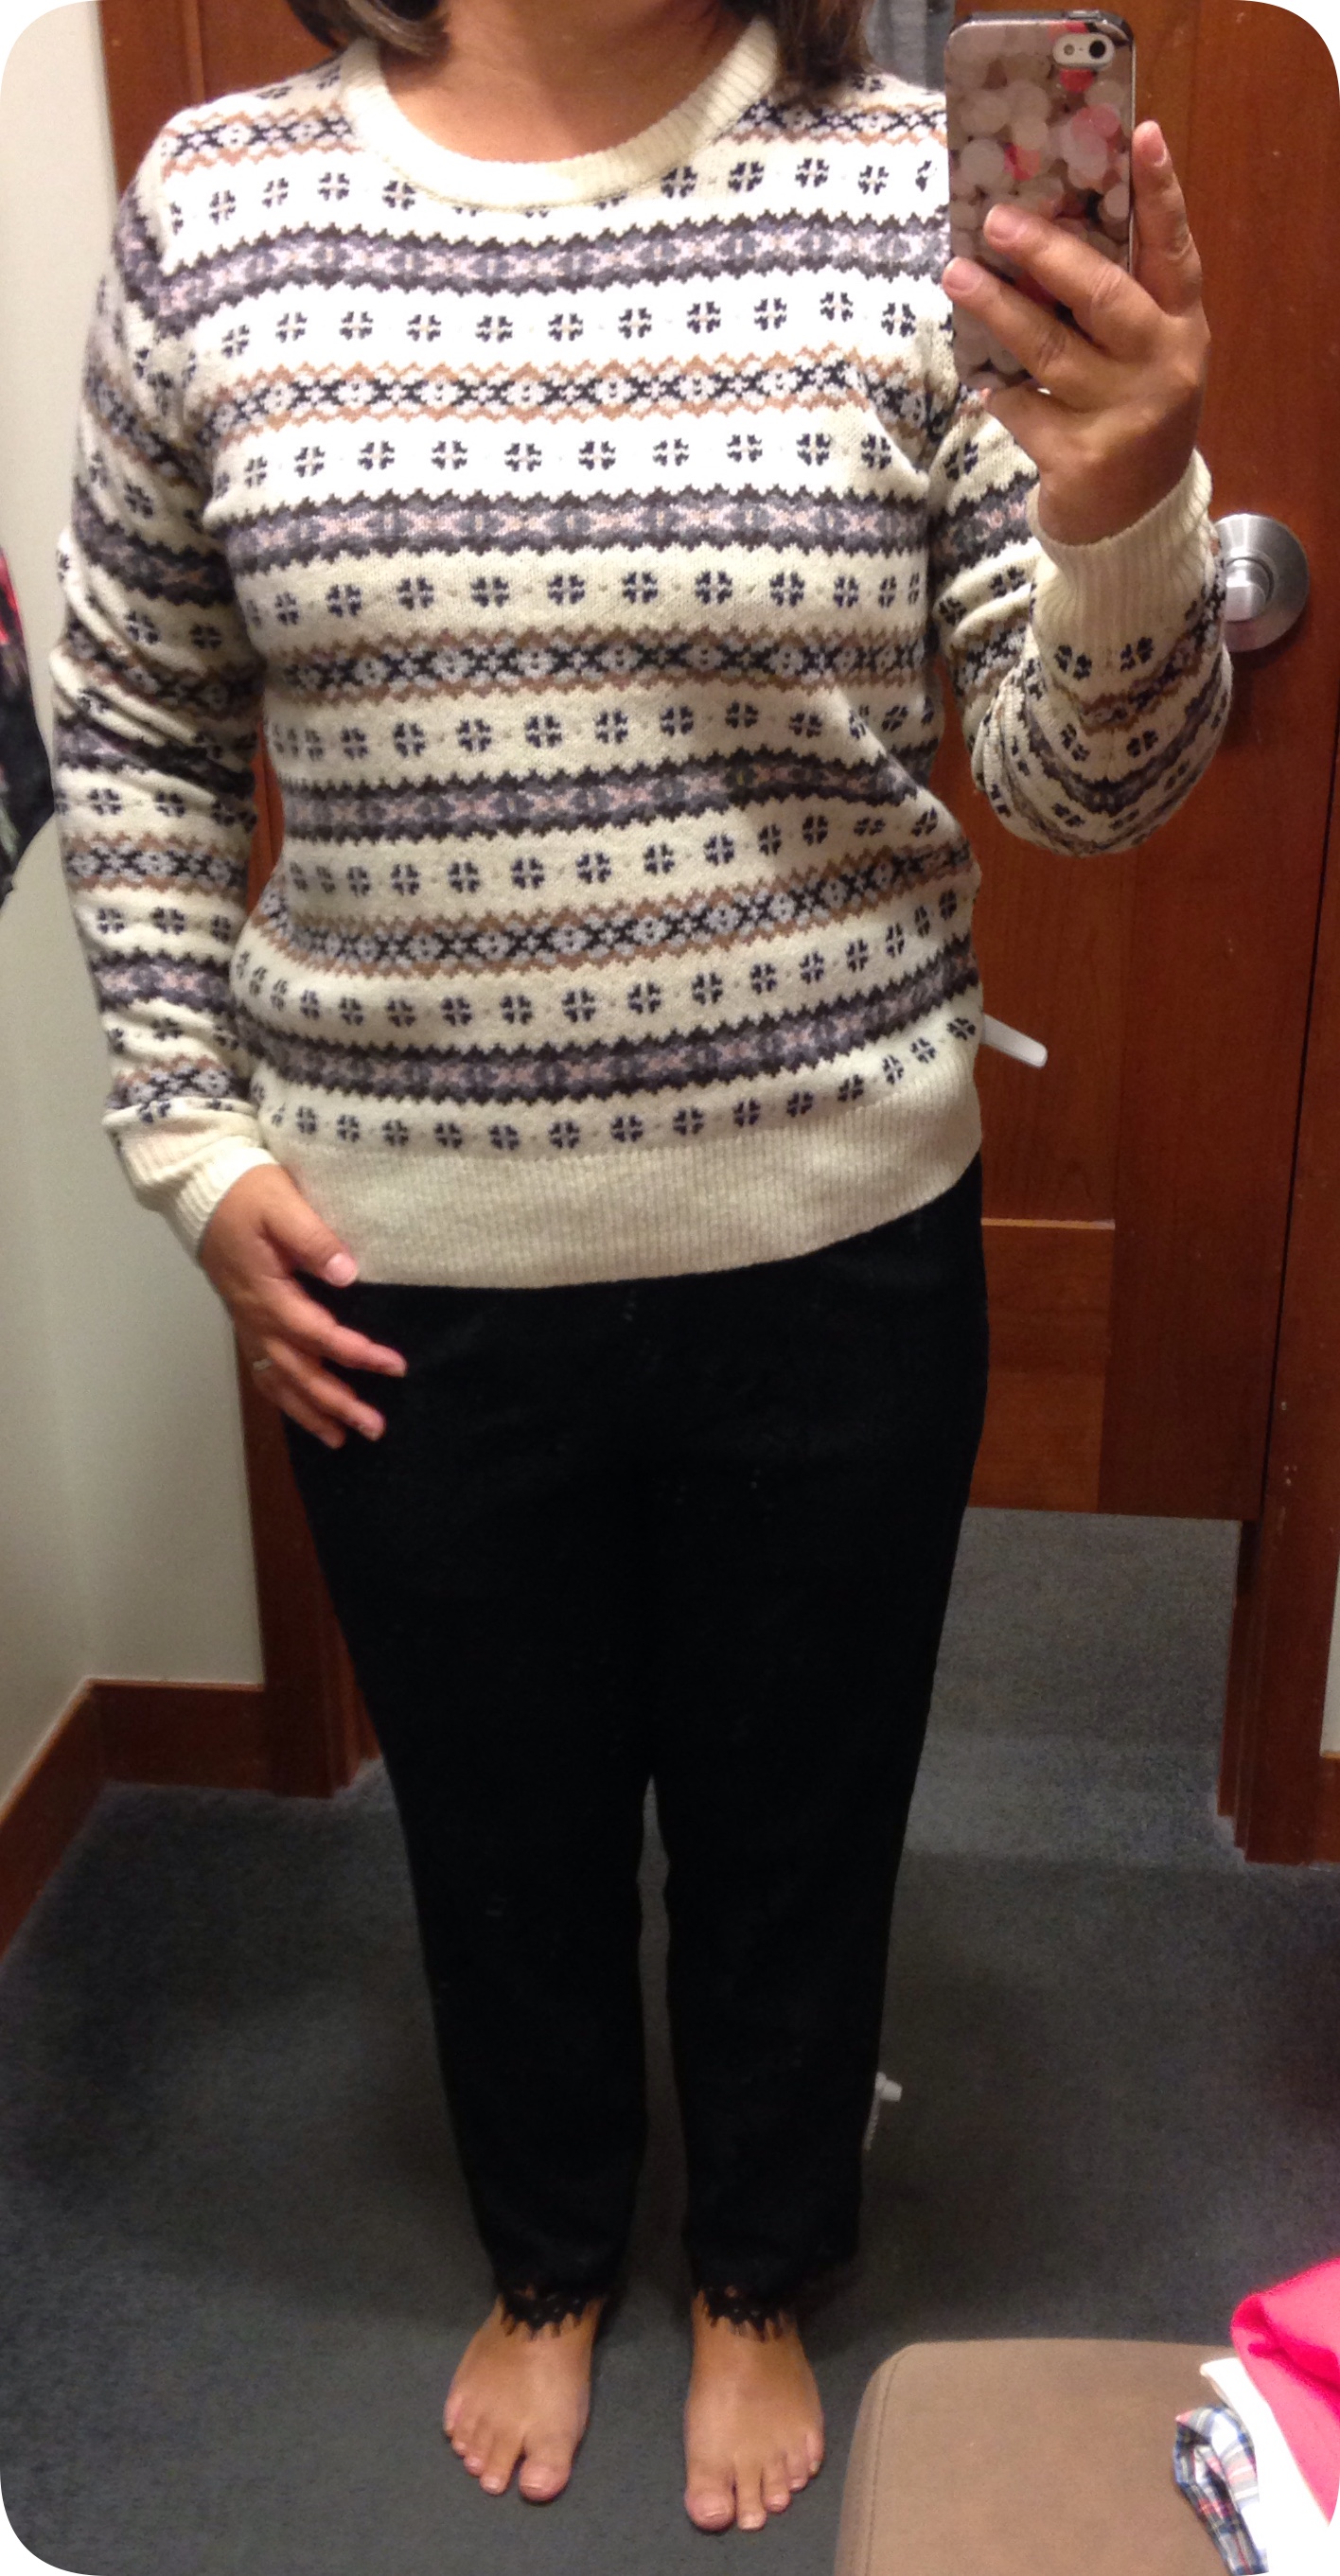 J Crew: Fair Isle Crewneck Sweater, Pull-on Pant in Lace Floral ...